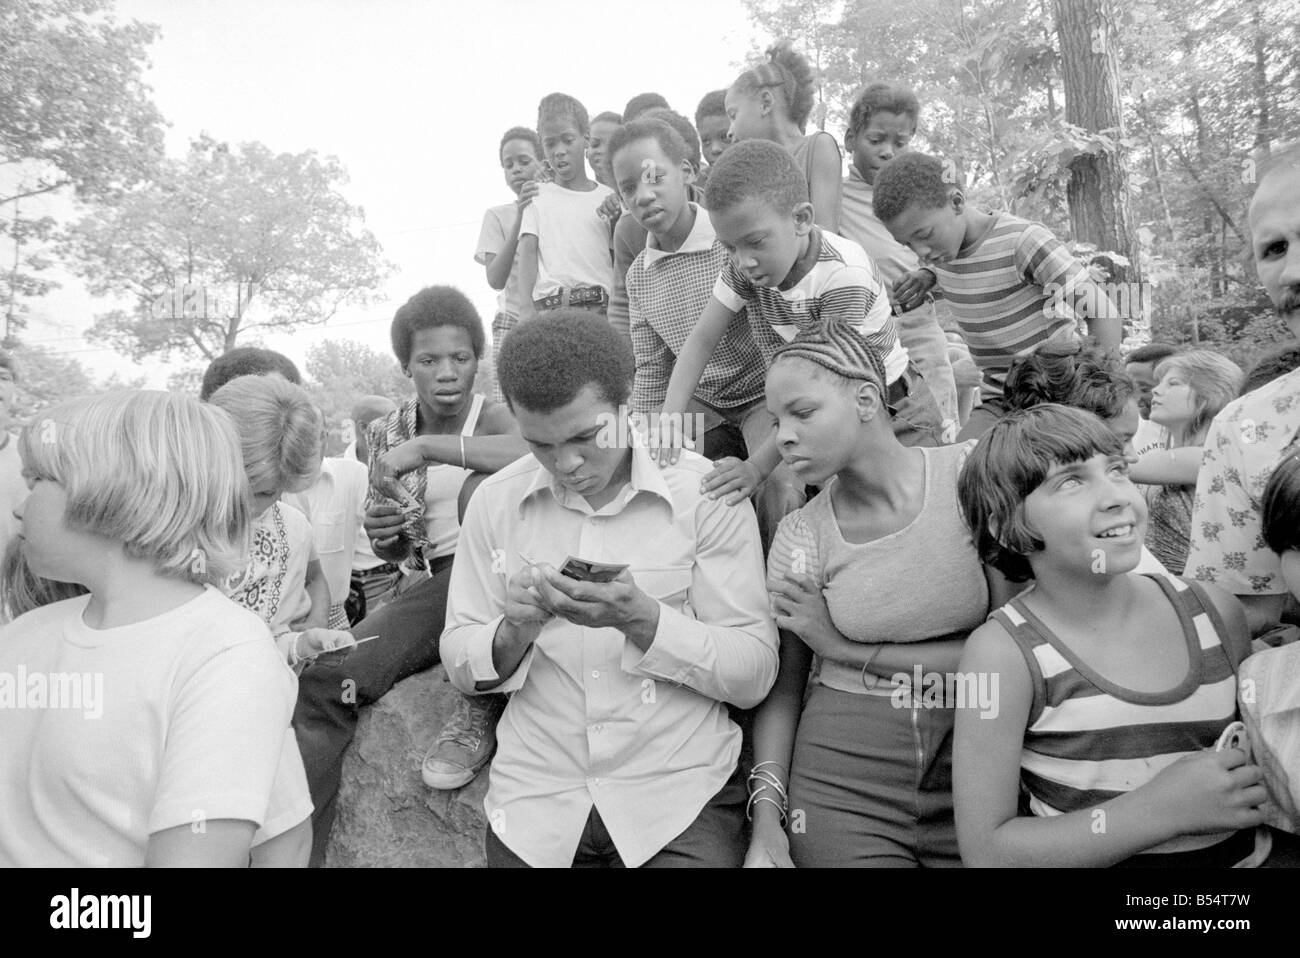 Muhammad Ali Cassius Clay training at his Pennsylvanian mountain retreat for his fight against George Foreman in Zaire With family friends and fans August 27th 1974 27 08 1974 74 5147 Local Caption mohamed Stock Photo